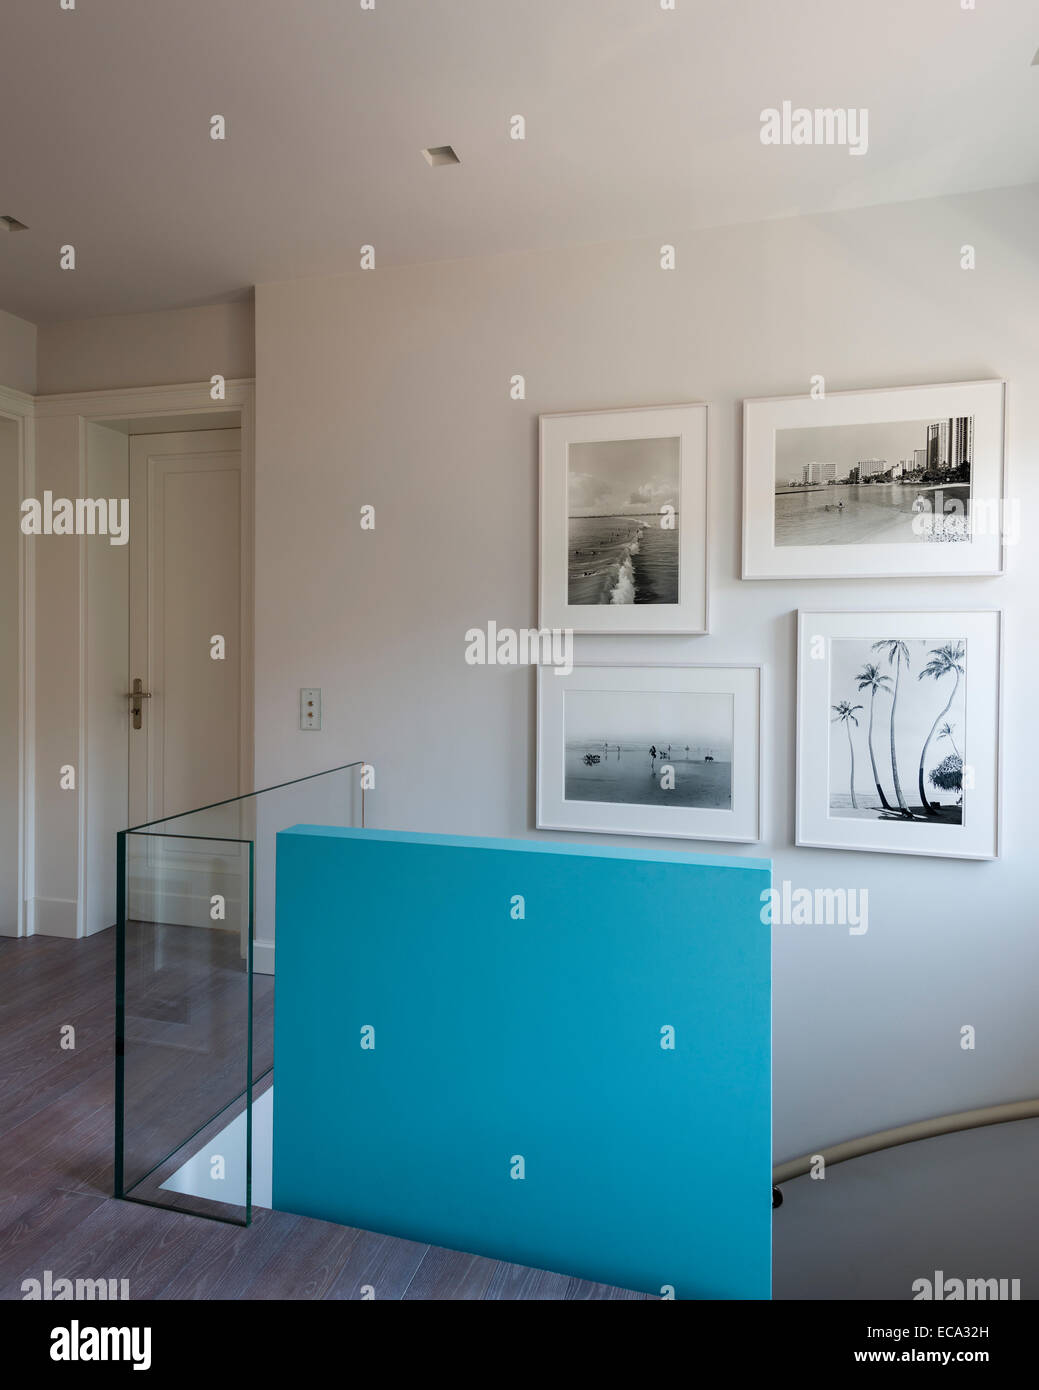 Aqua painted poured-concrete wall on landing with collection of Henry Wessel photographs Stock Photo